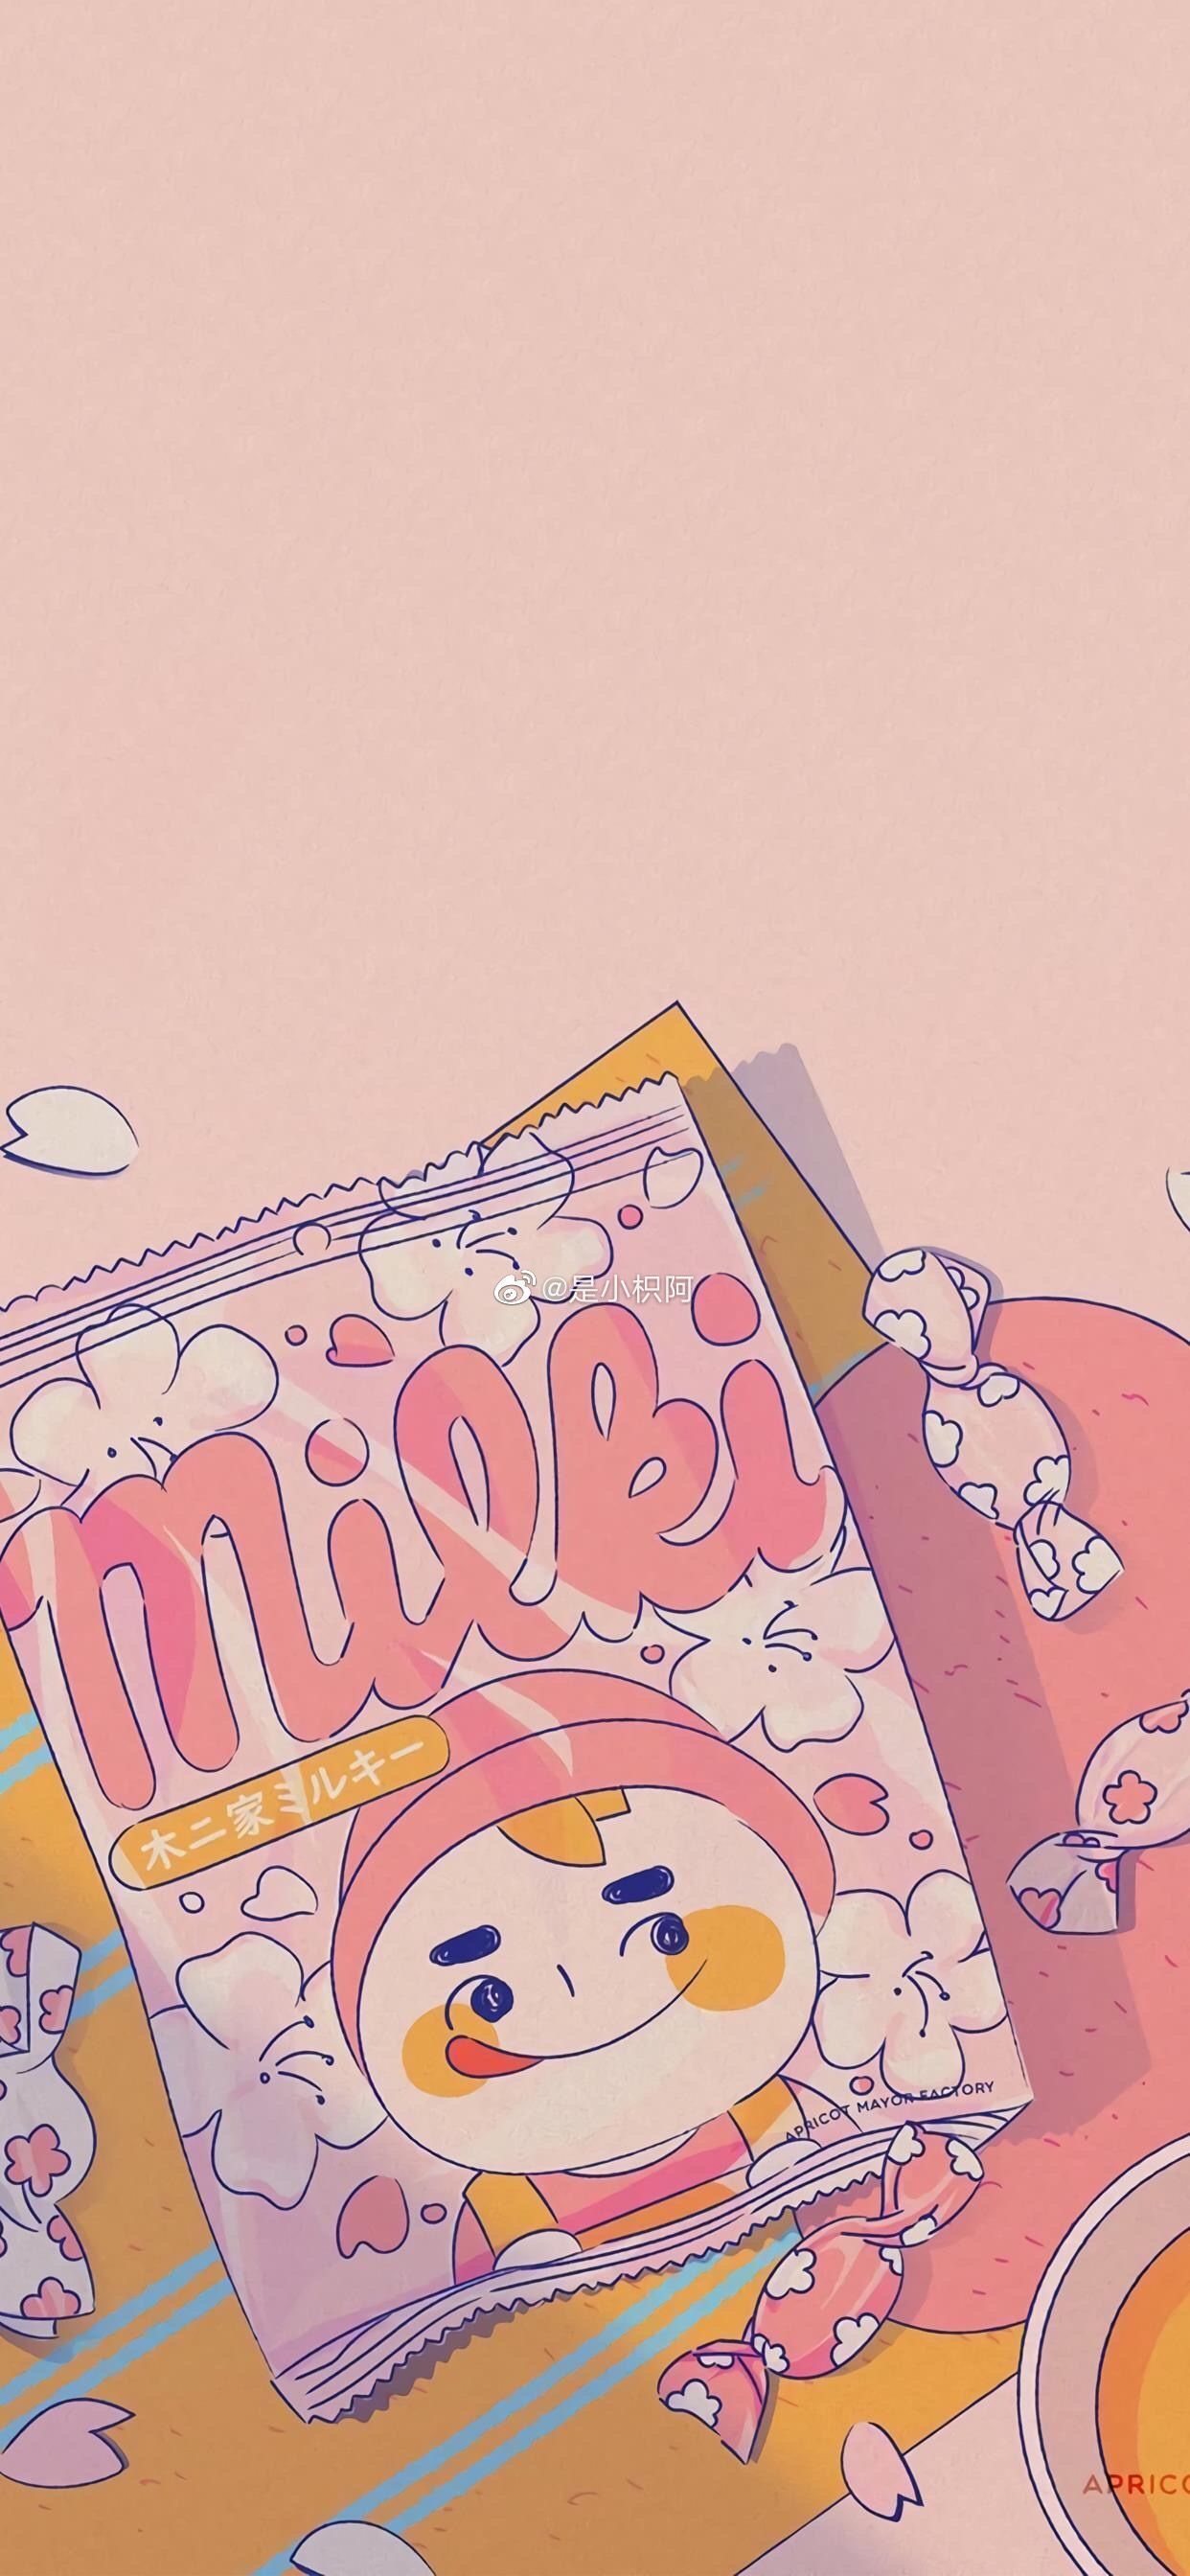 IPhone wallpaper of a pink candy bar - Pink anime